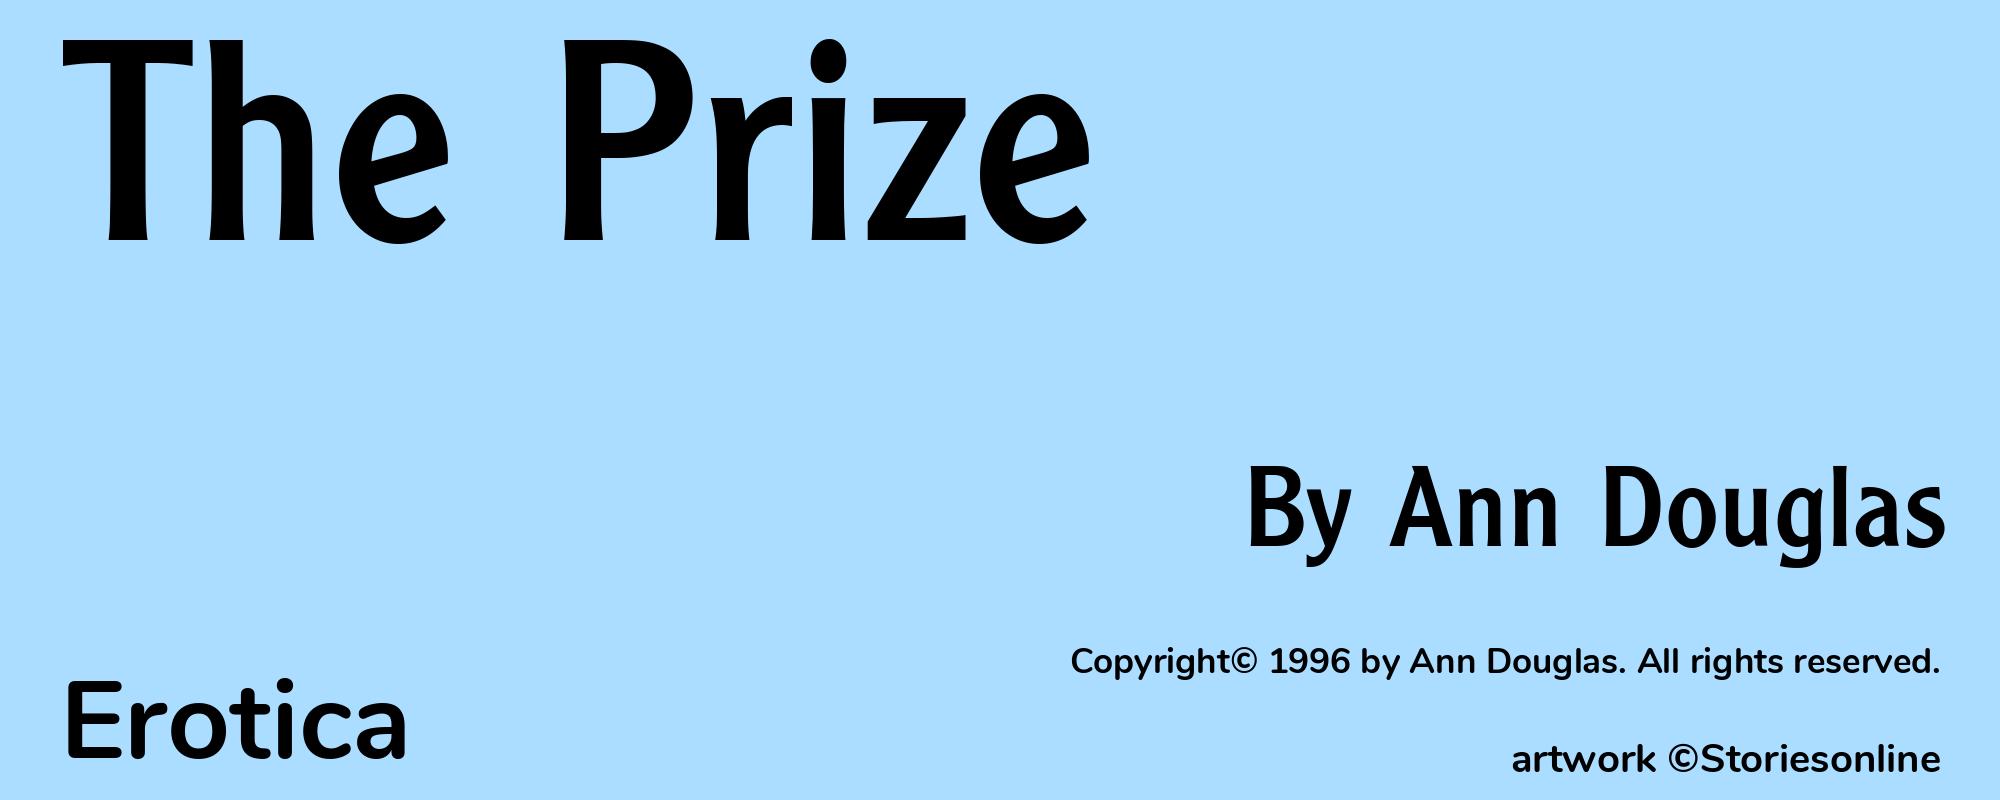 The Prize - Cover